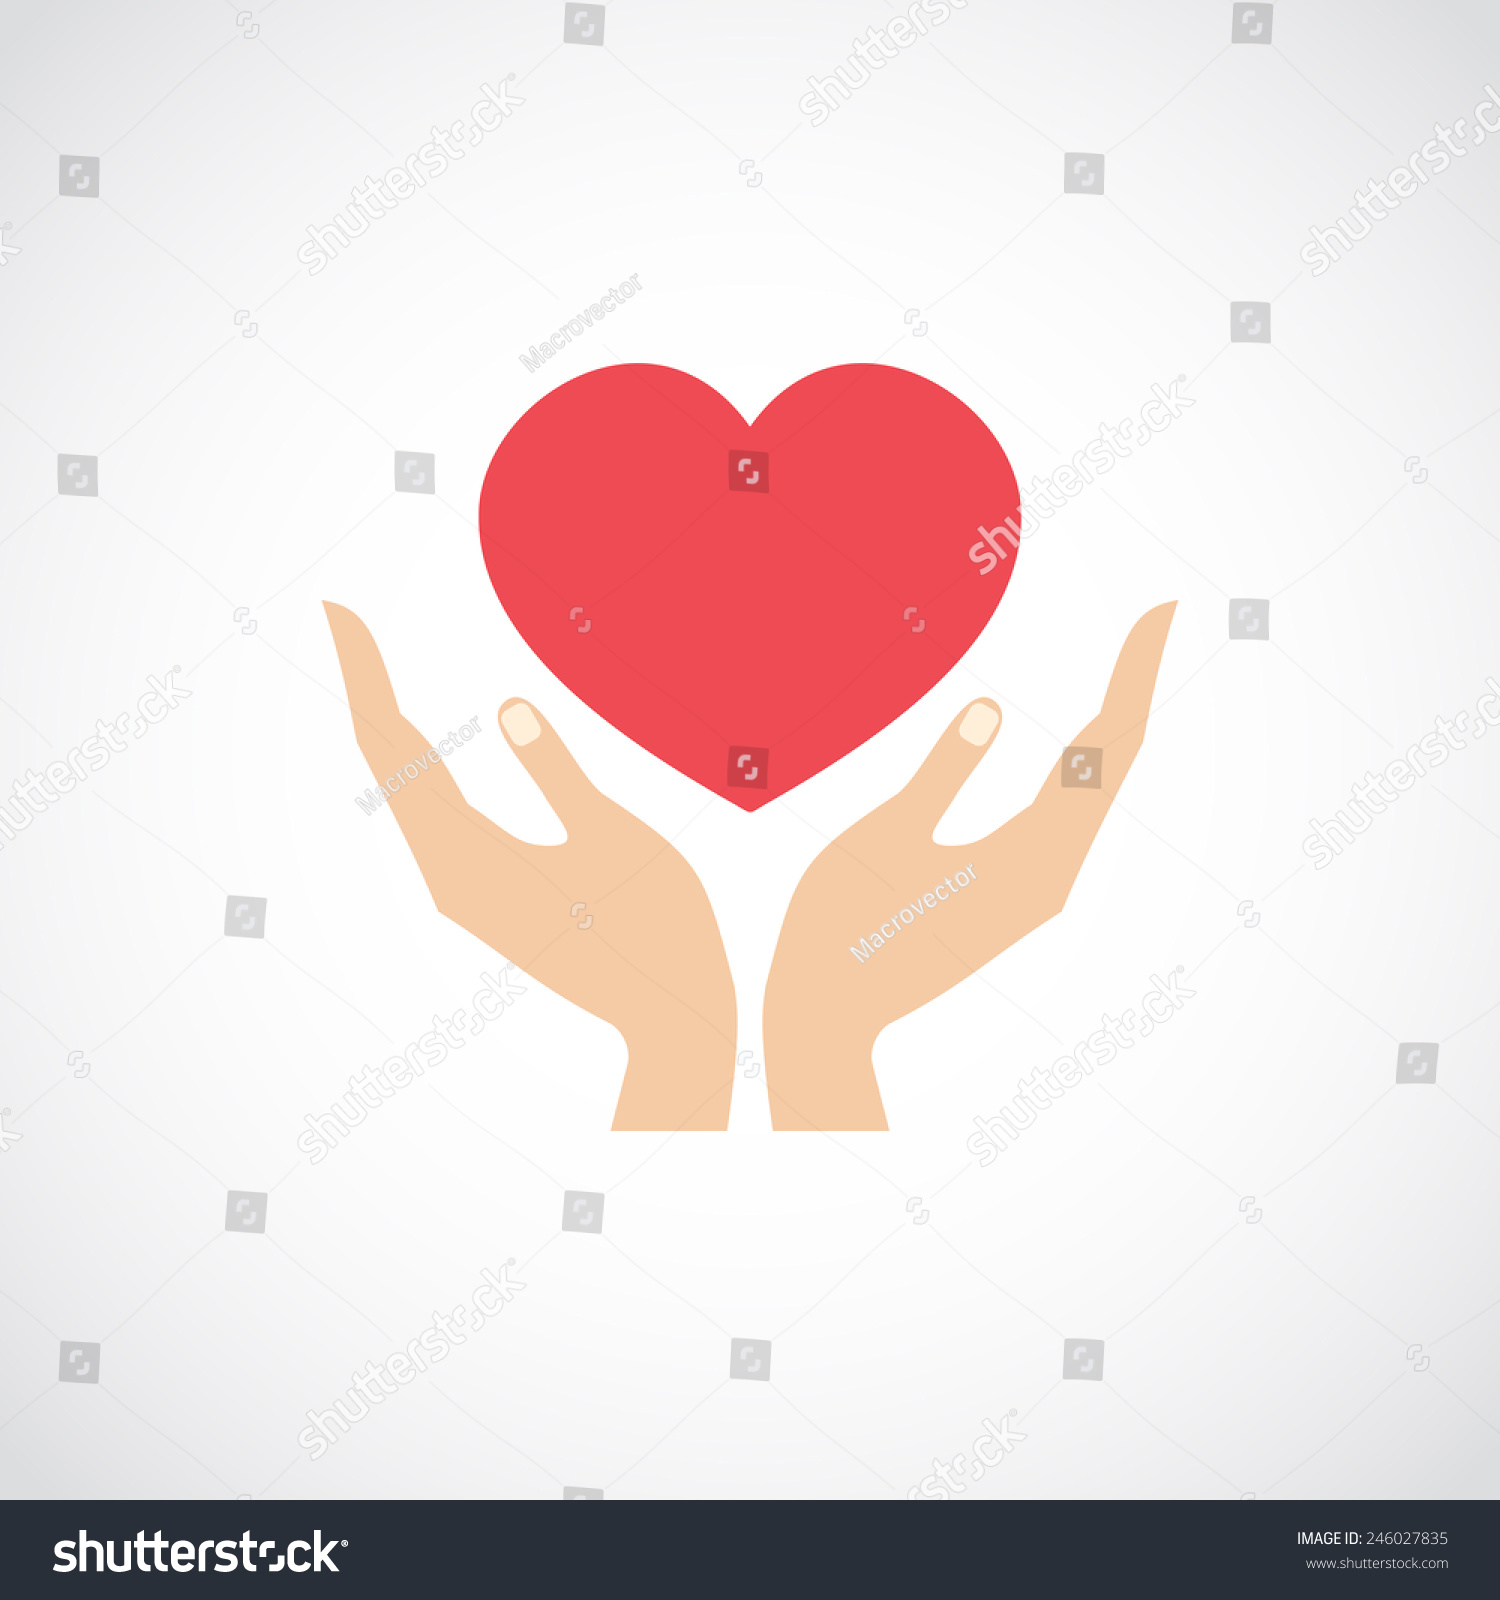 Human Hands Holding And Protect Red Heart Love And Health Symbol Vector ...